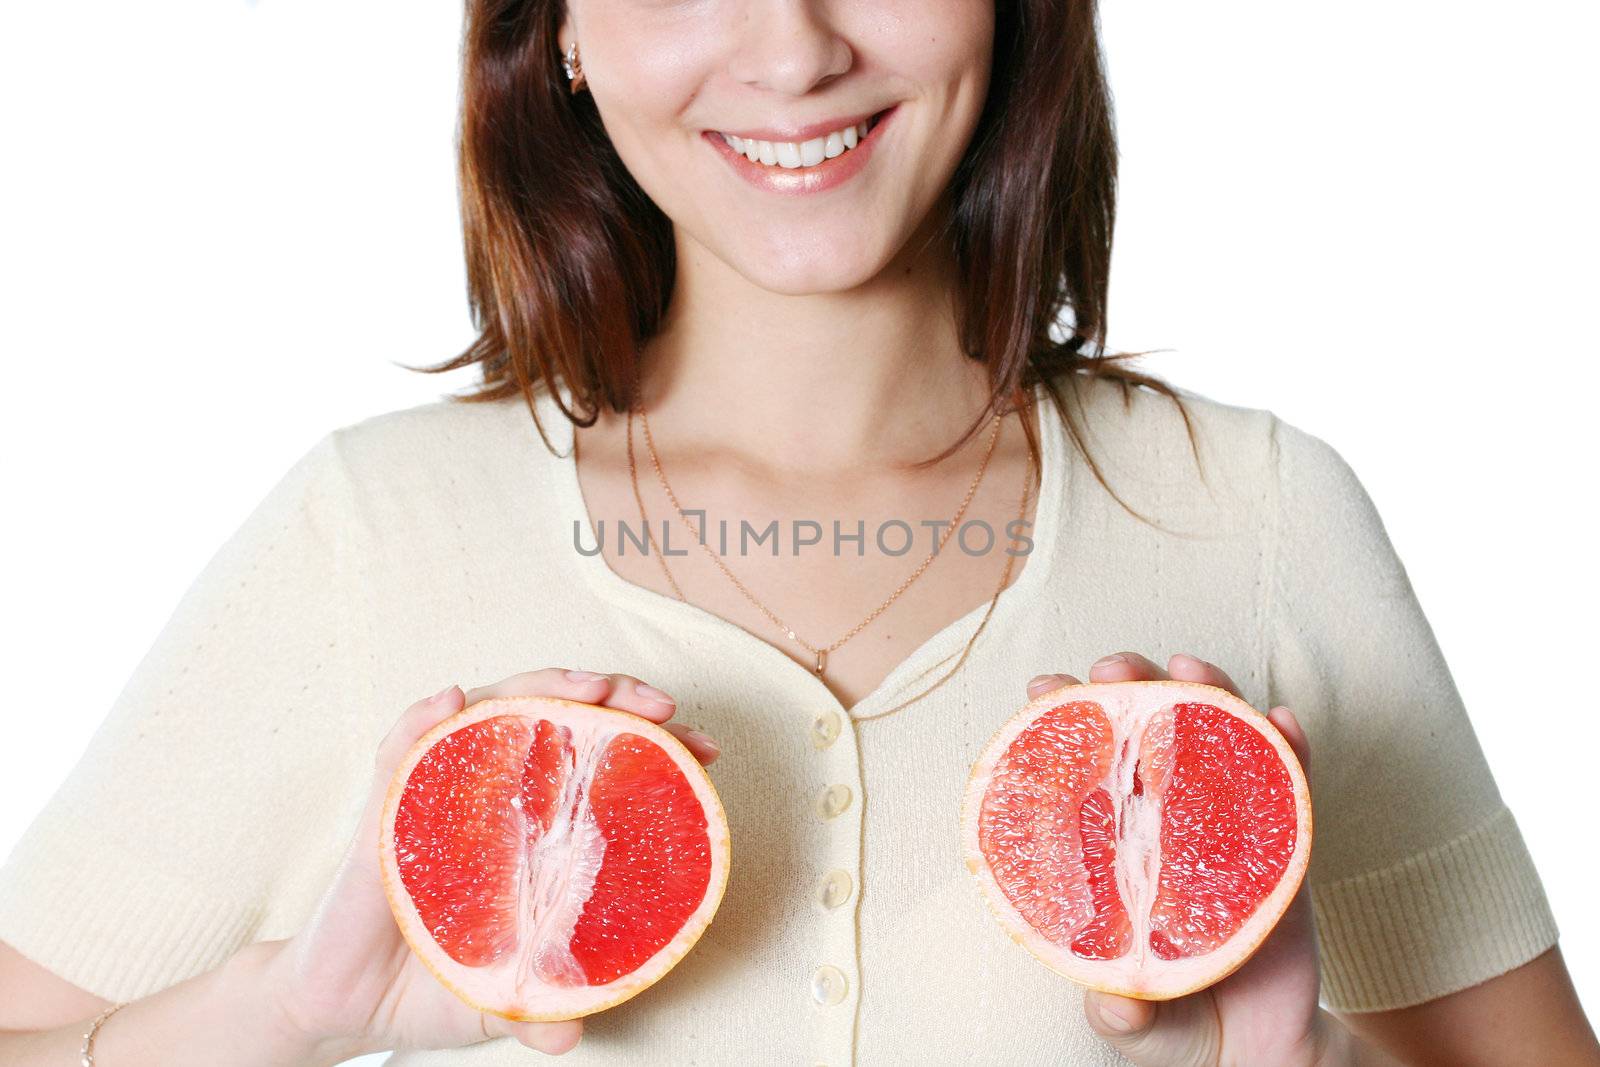  isolated white happiness dieting caucasian teeth fruit